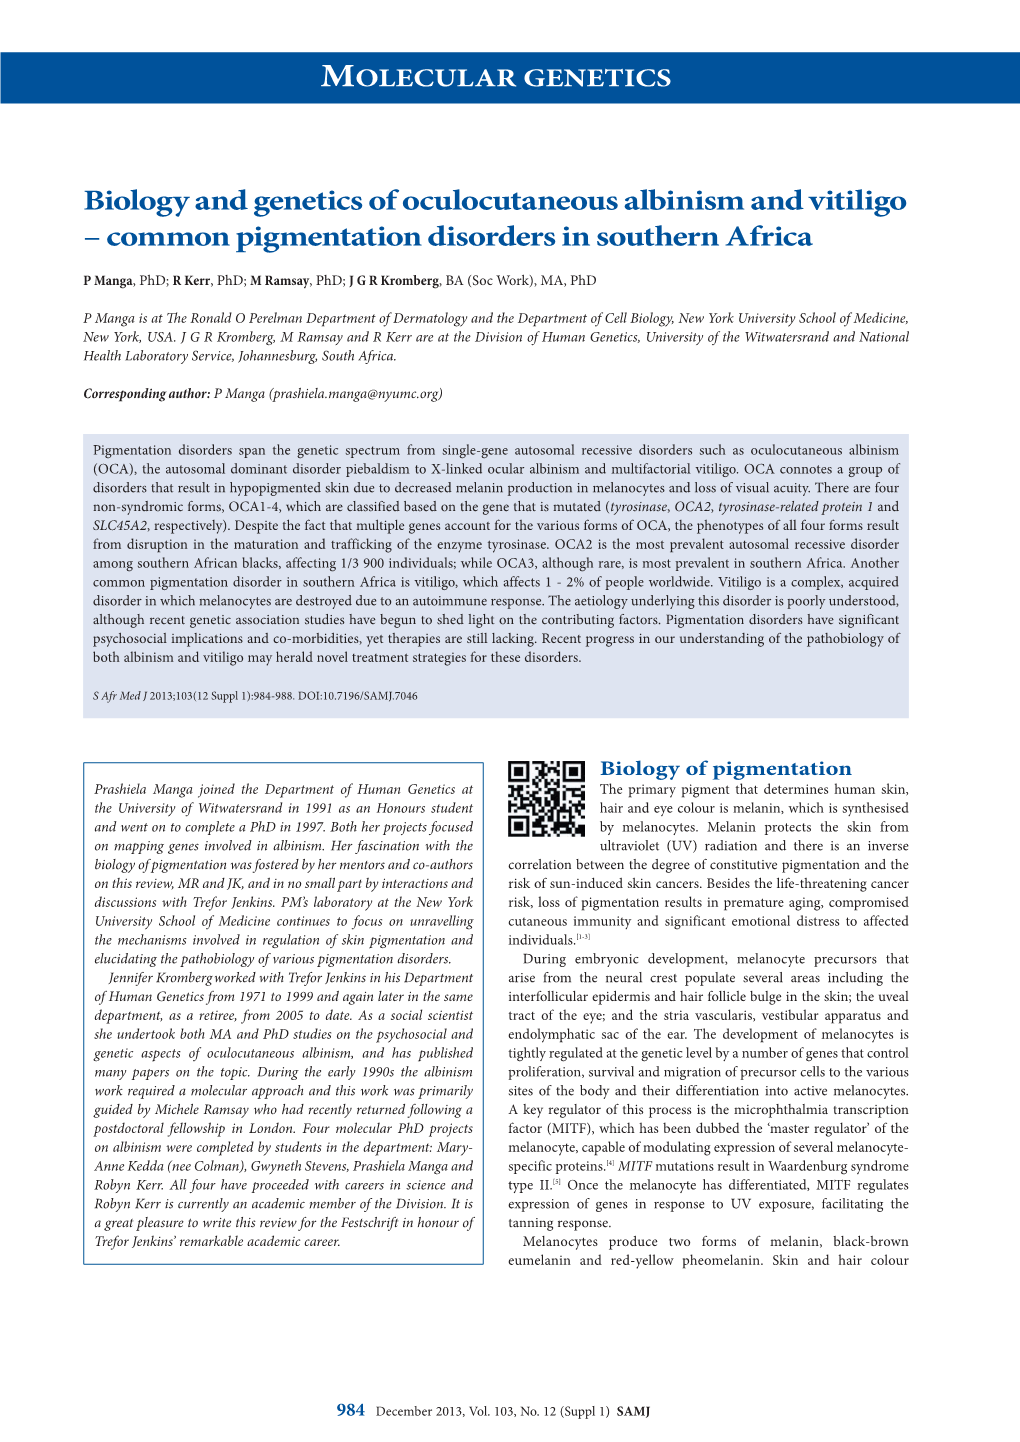 Biology and Genetics of Oculocutaneous Albinism and Vitiligo – Common Pigmentation Disorders in Southern Africa